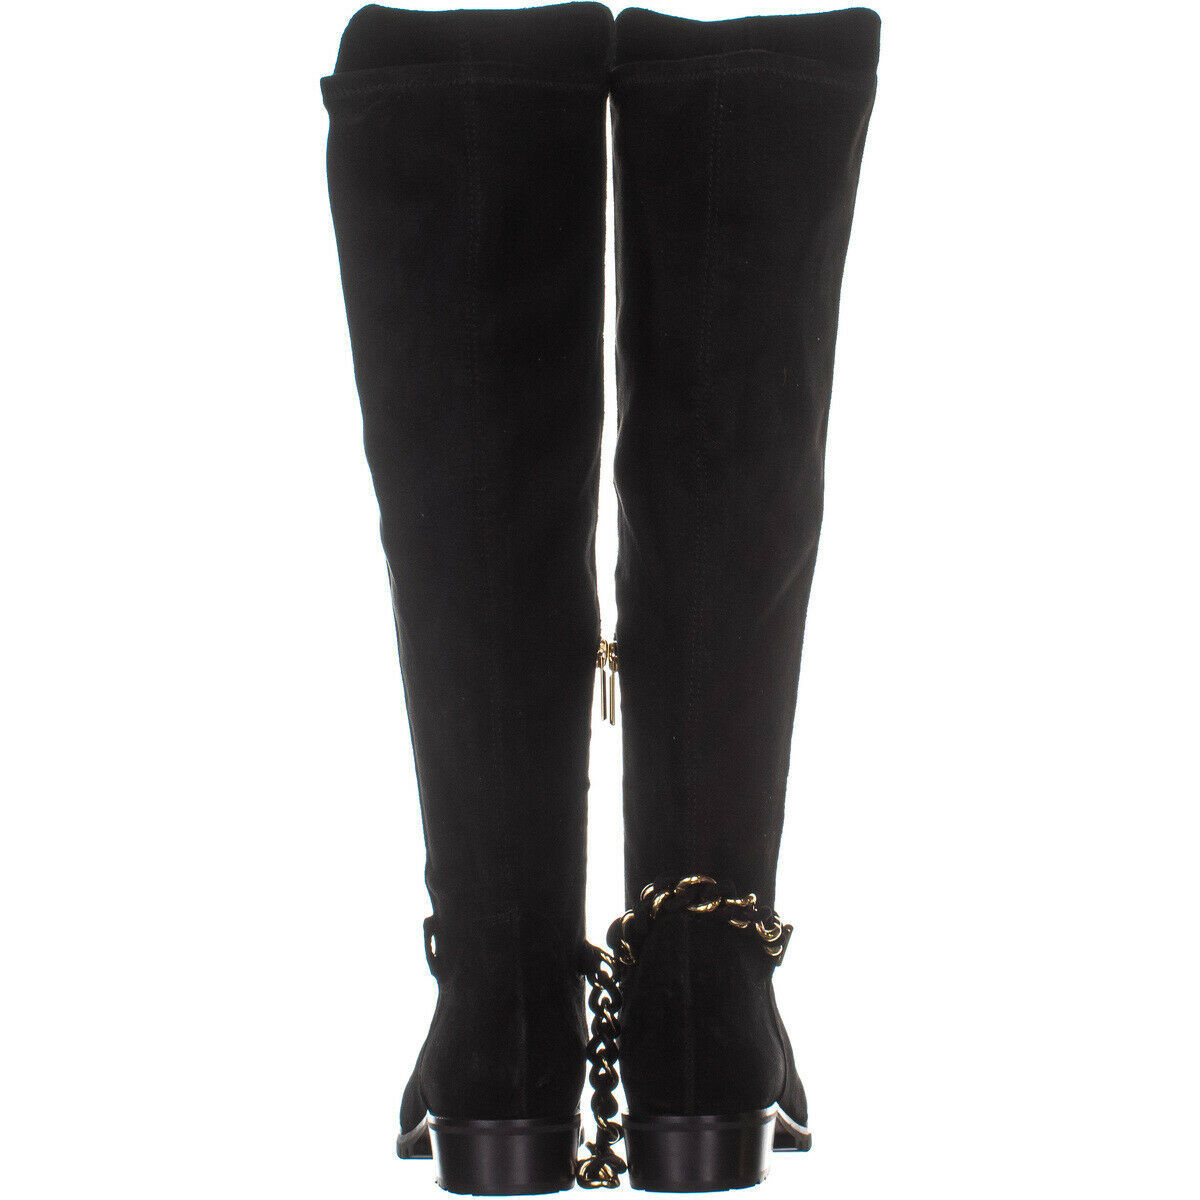 Karl Lagerfeld Skylar Over The Knee Boots 352, Black, 8 US - Boots